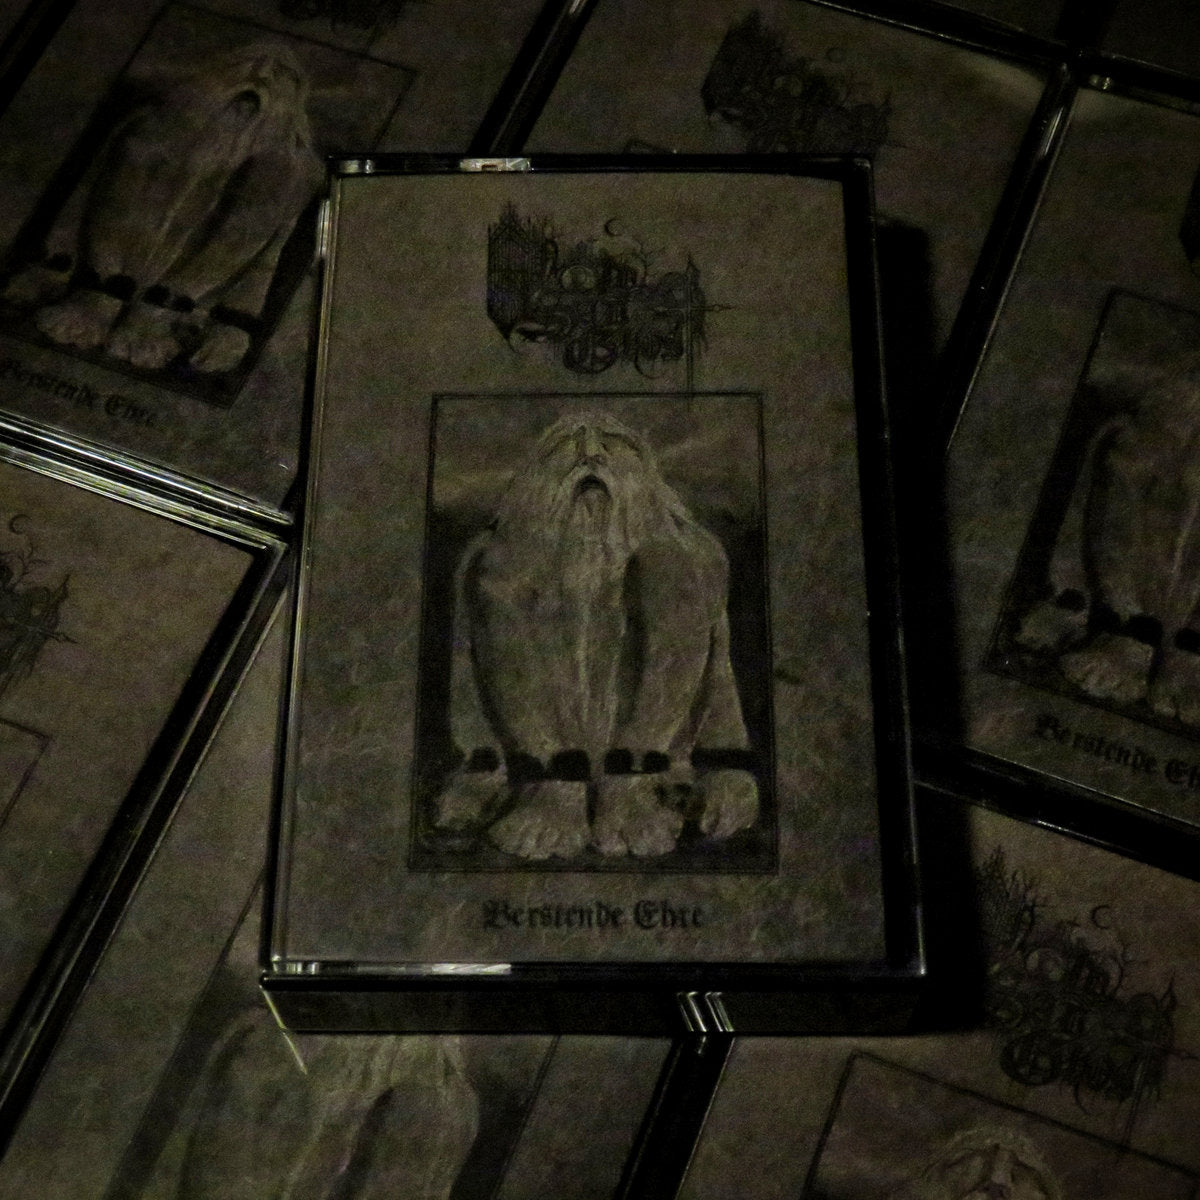 [SOLD OUT] AN OLD SAD GHOST "Berstende Ehre" Cassette Tape